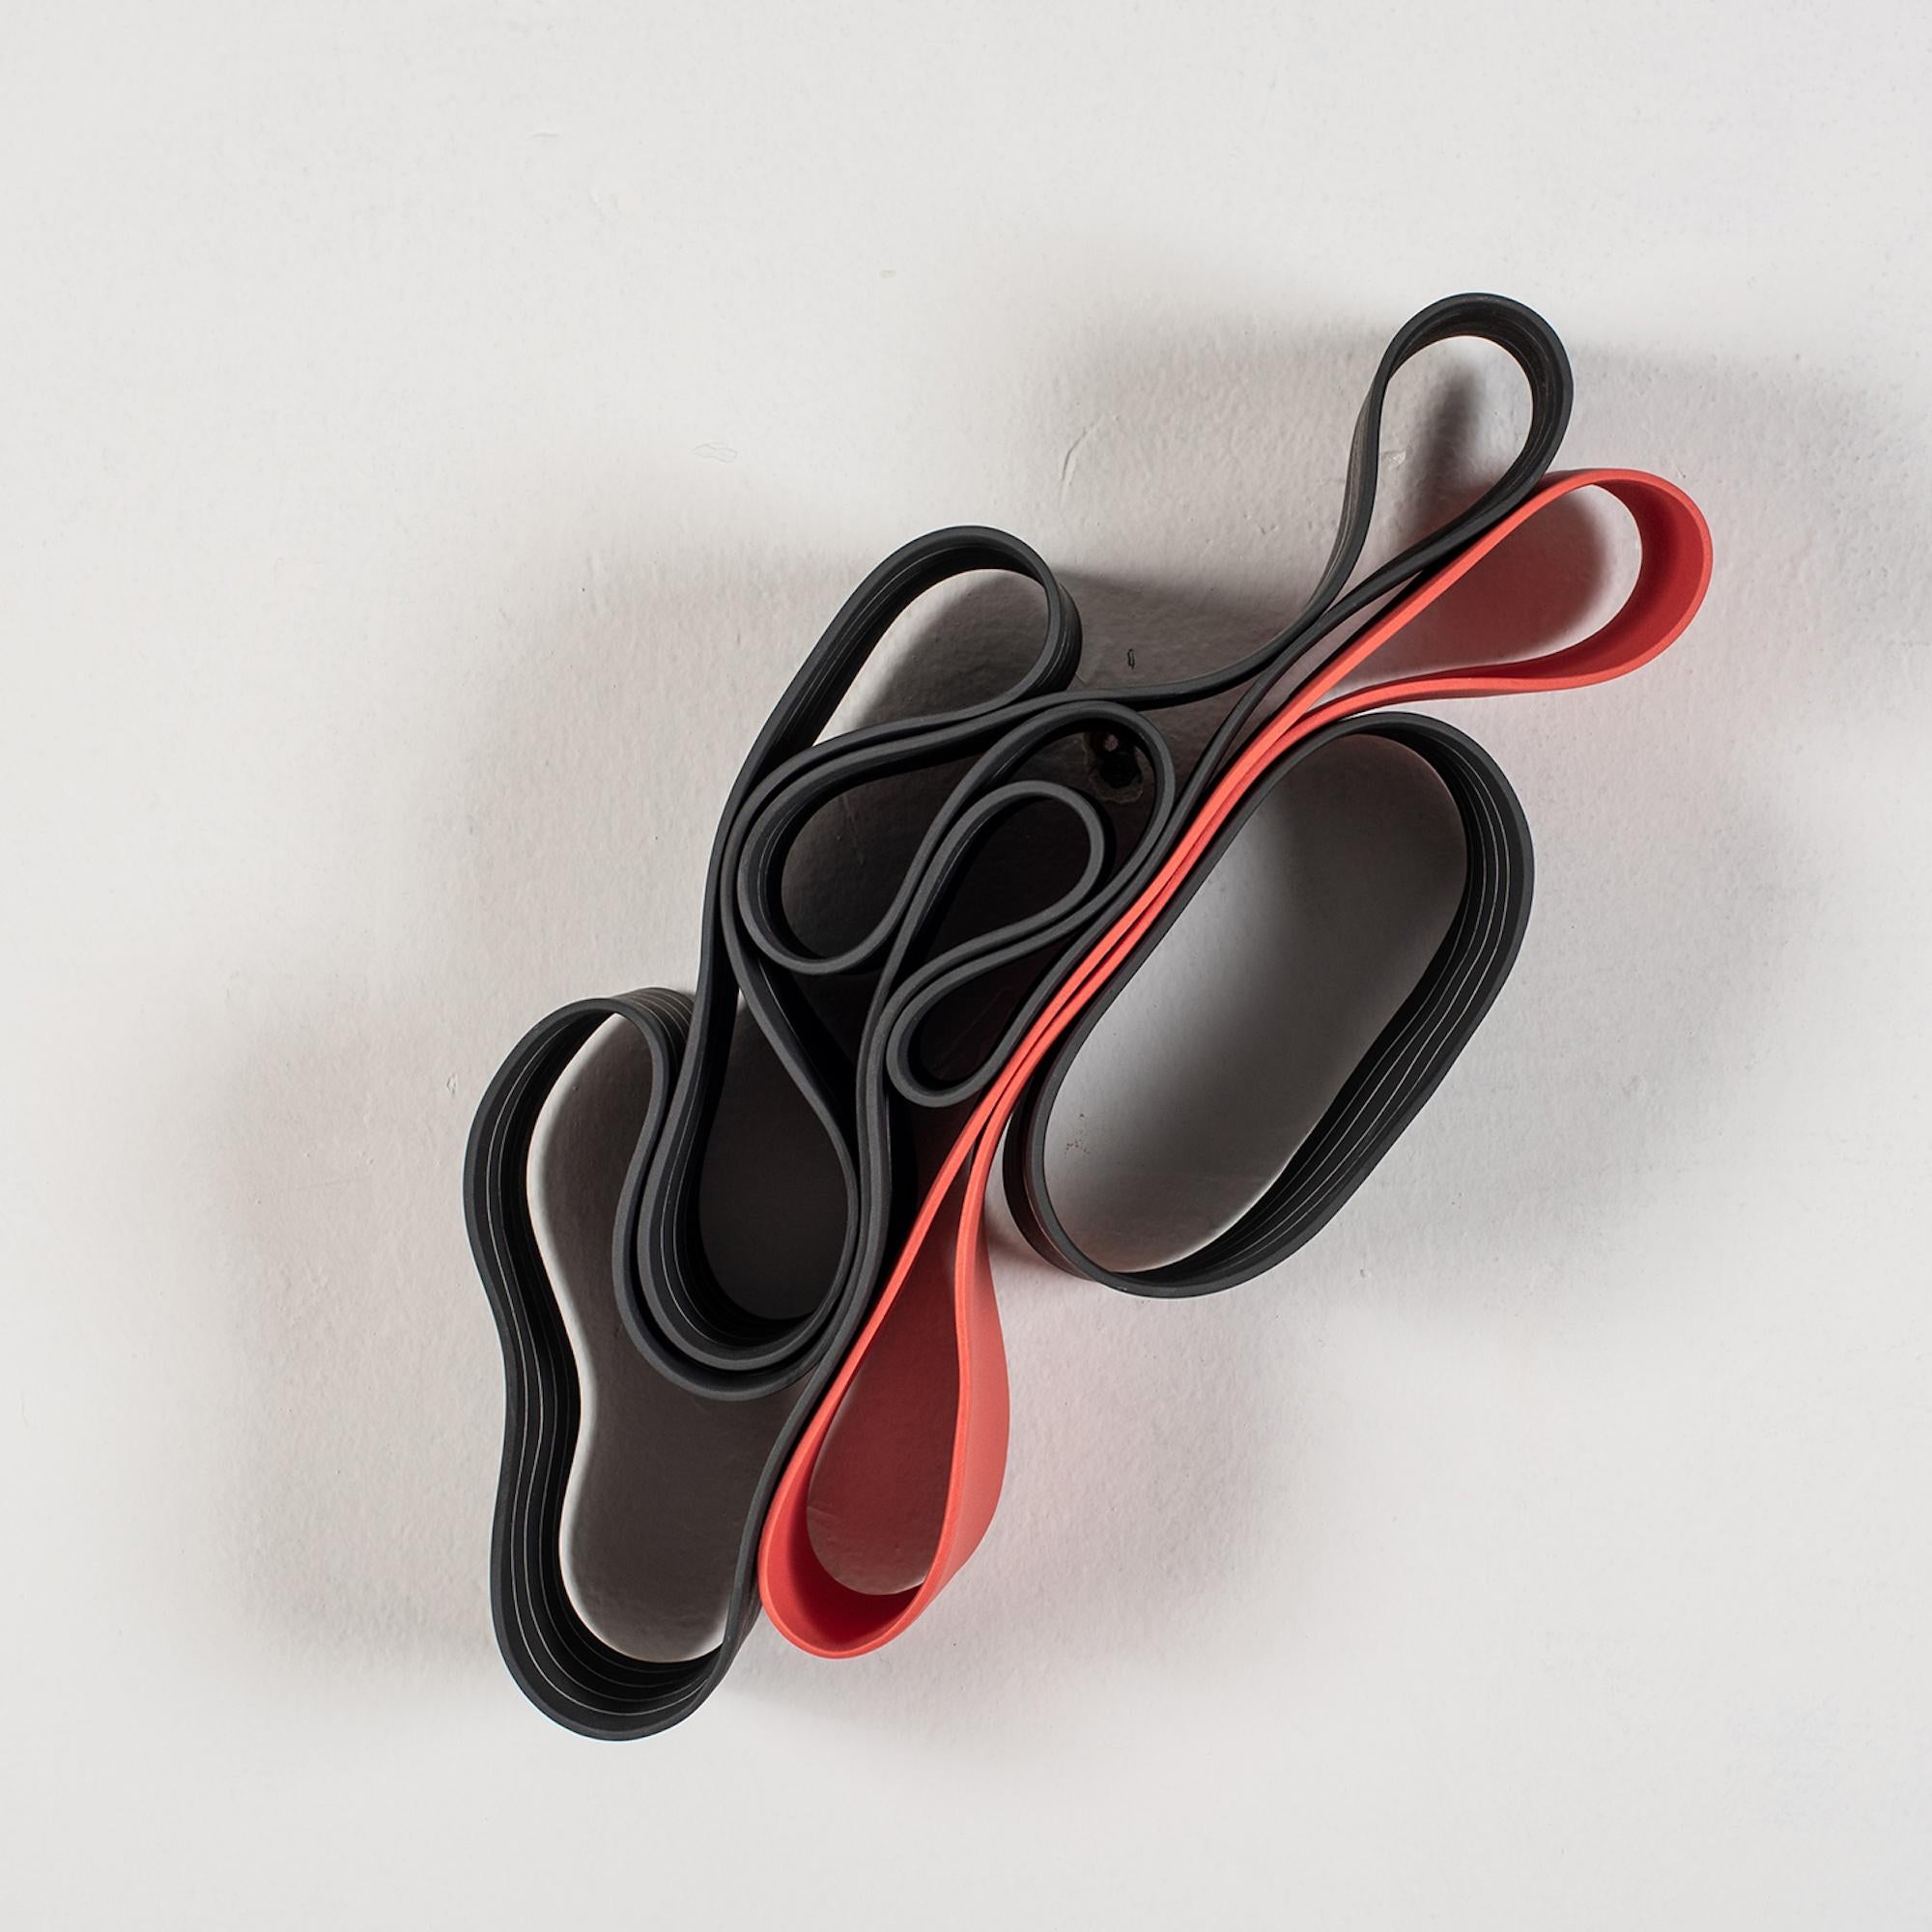 Wall Object #2 by Simcha Even-Chen - Porcelain sculpture, red and black, lines For Sale 1